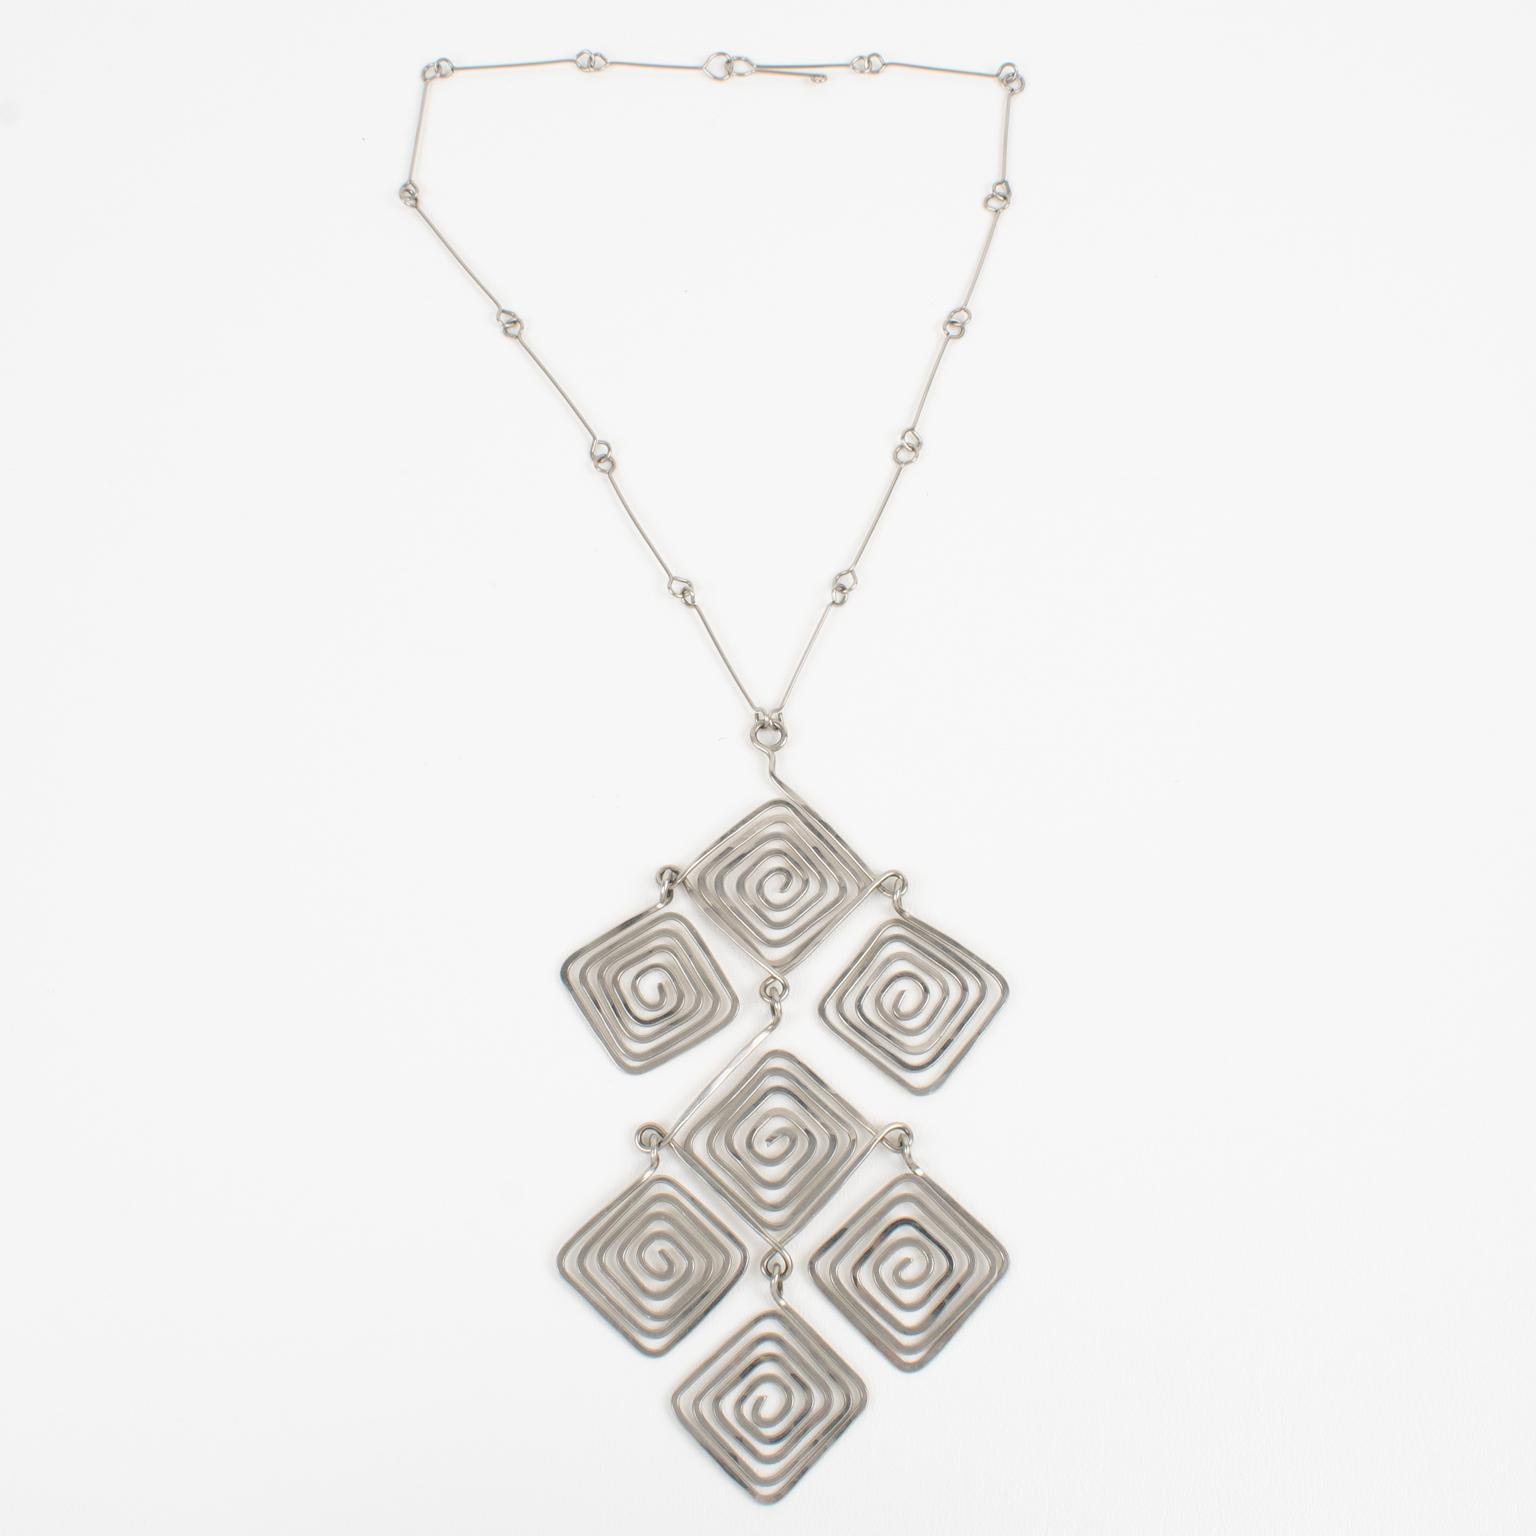 This elegant Mid-Century Modern Space Age long metal necklace with a geometric pendant was handmade in the 1960s in France. The piece features a chromed metal articulated wired chain and is ornate with an impressive geometric dangling pendant. The